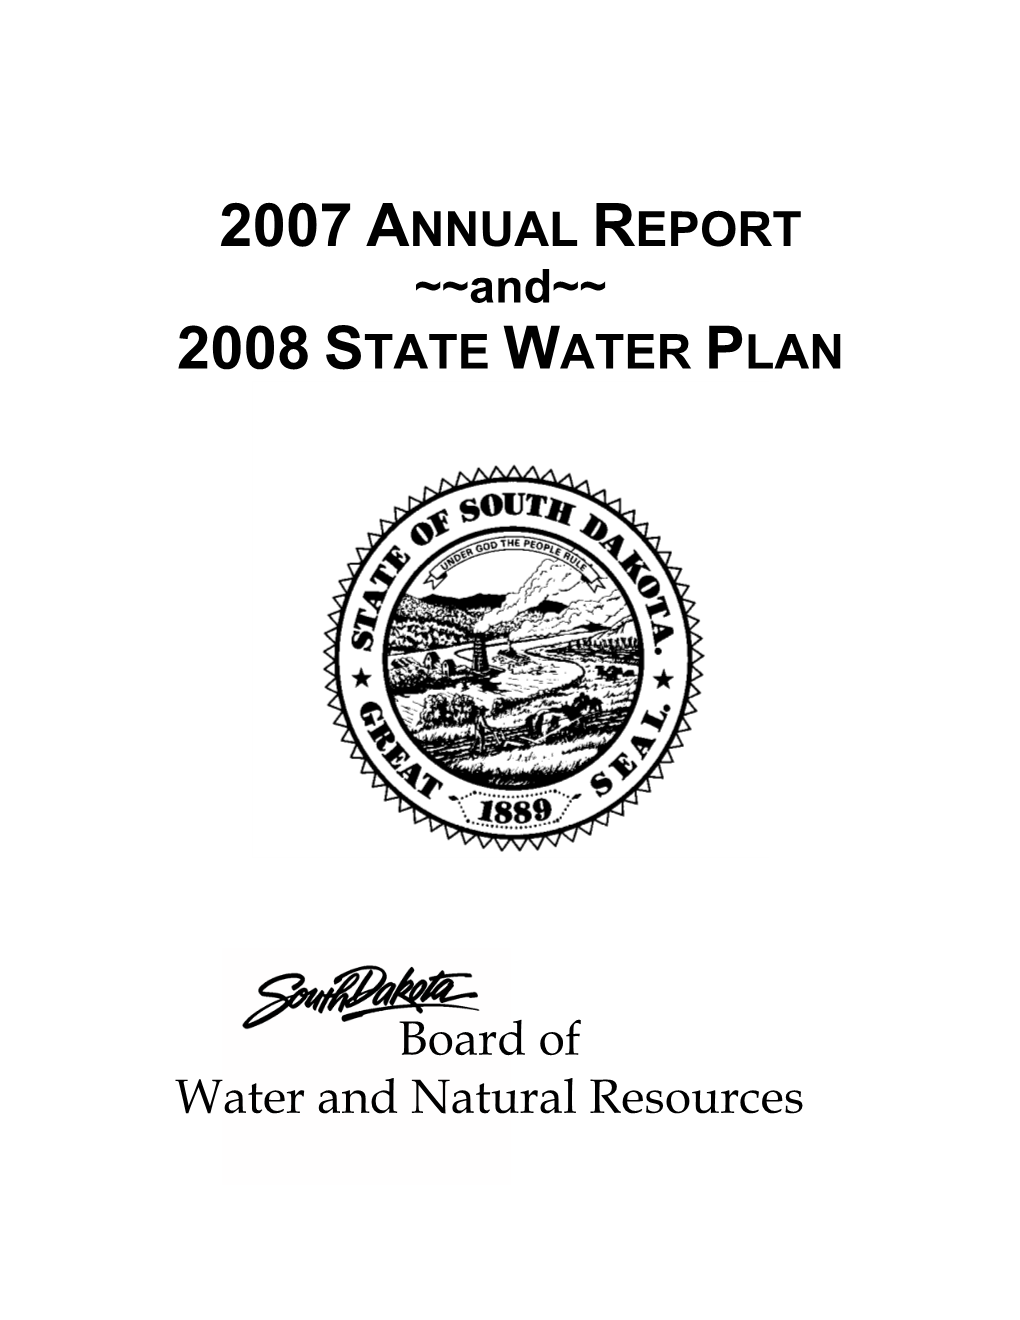 2007 Annual Report 2008 State Water Plan